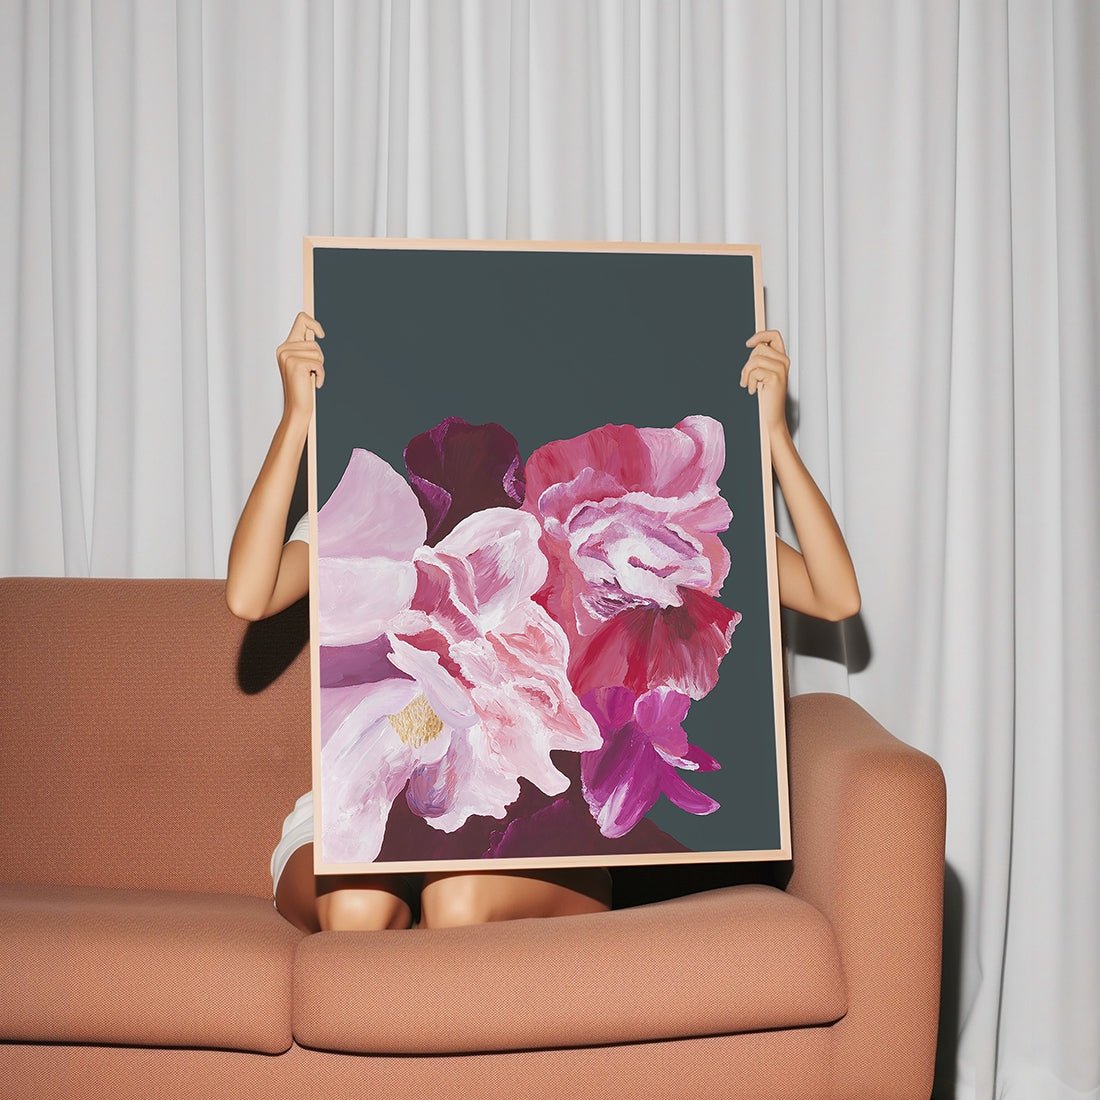 Woman holding a large pink flower fine art print named ’Balanced’.